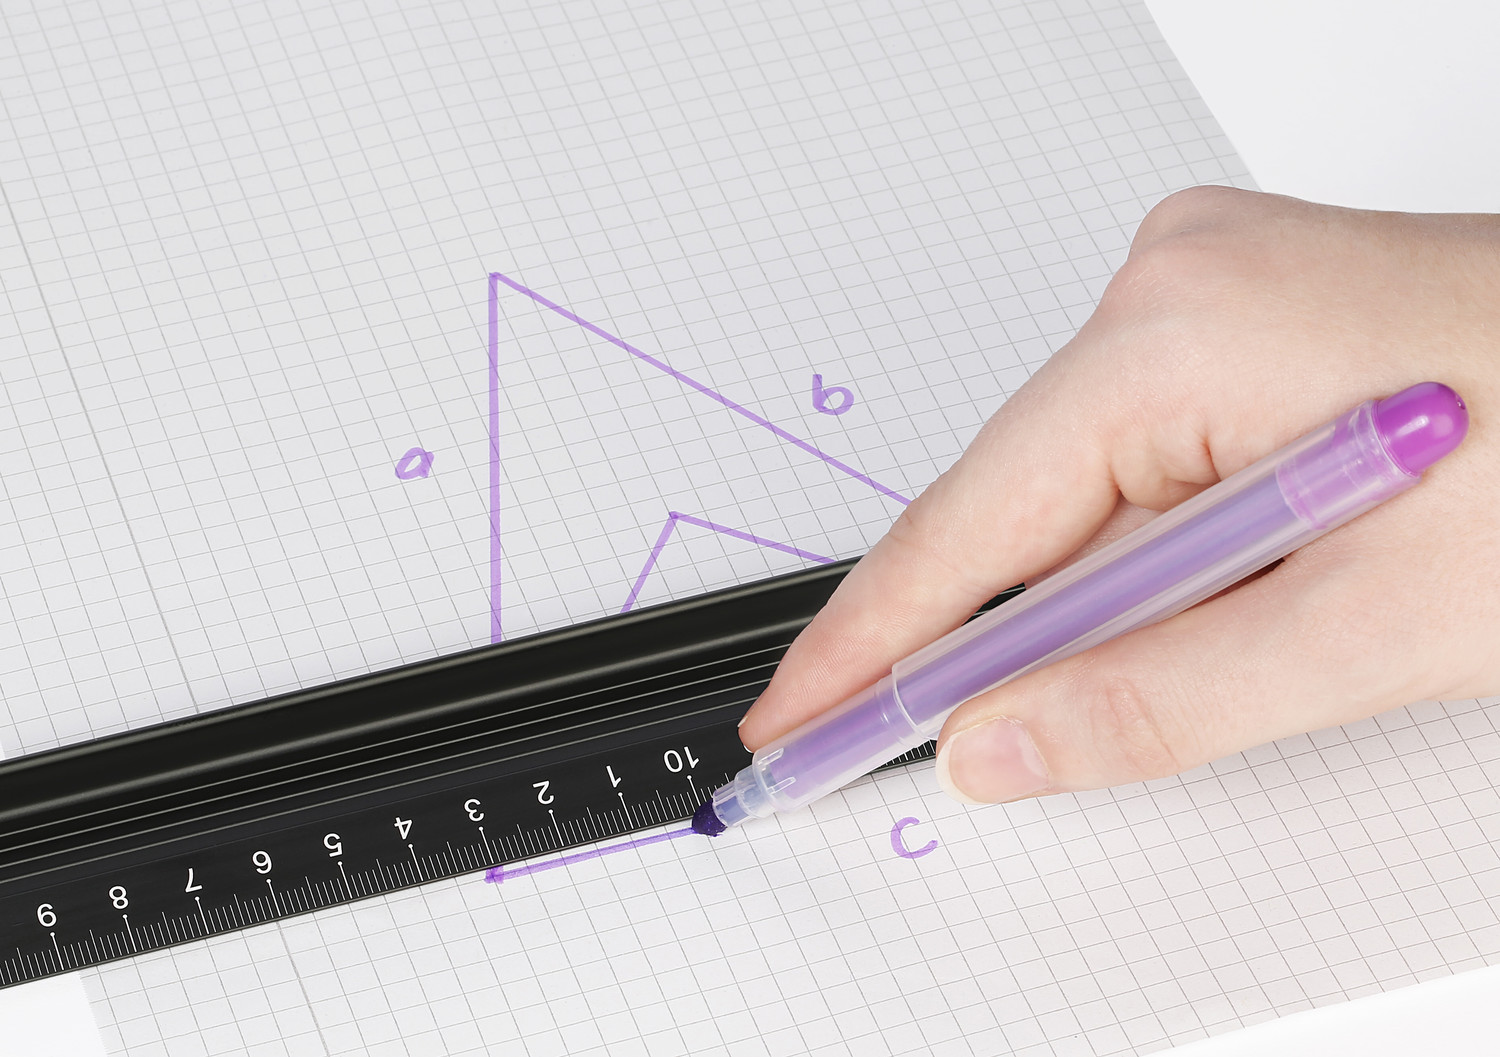 Raised ridge ensures clean lines and prevents ink from running or smearing.